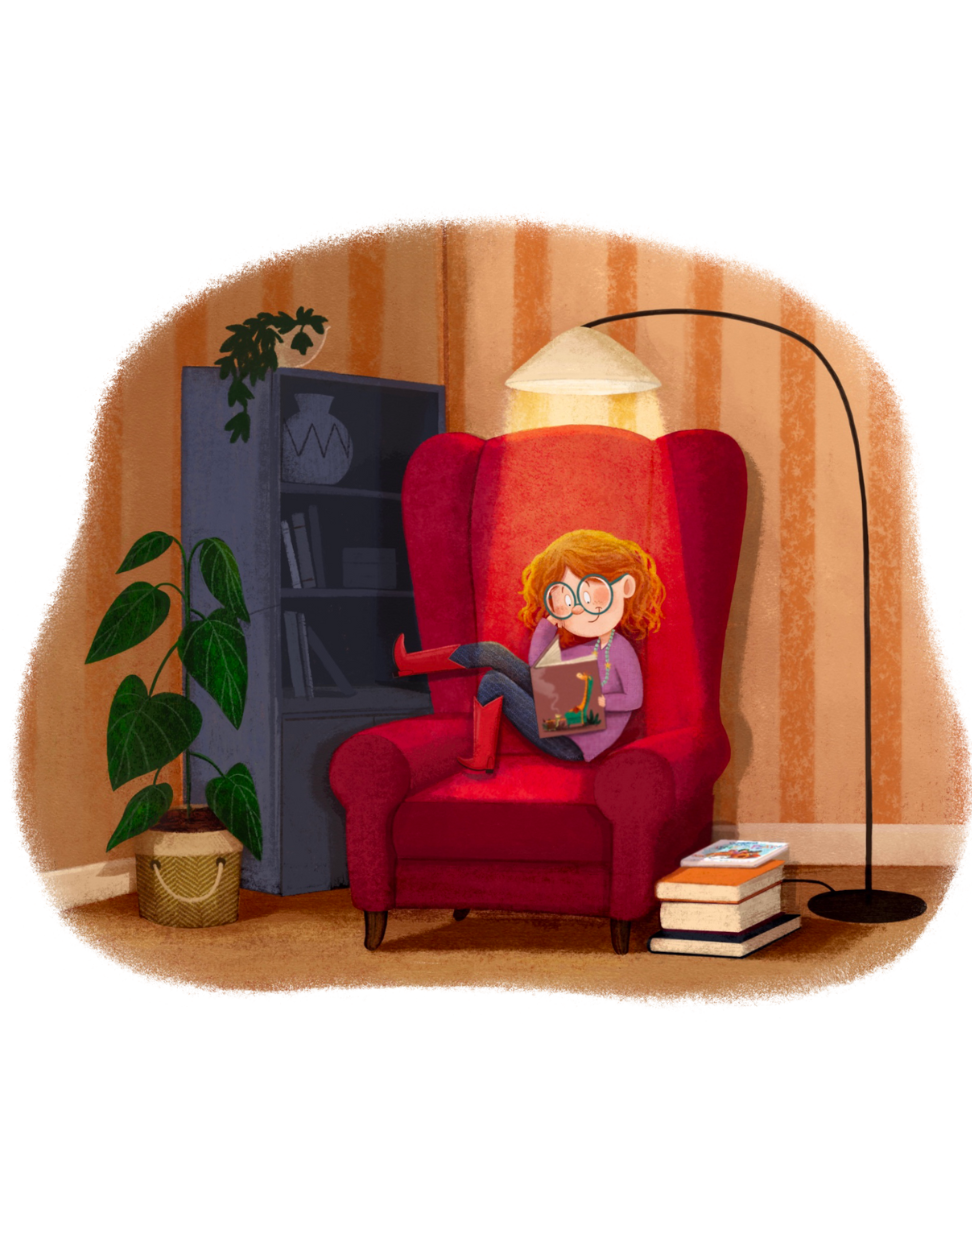 Illustration of a child reading in a large red chair.